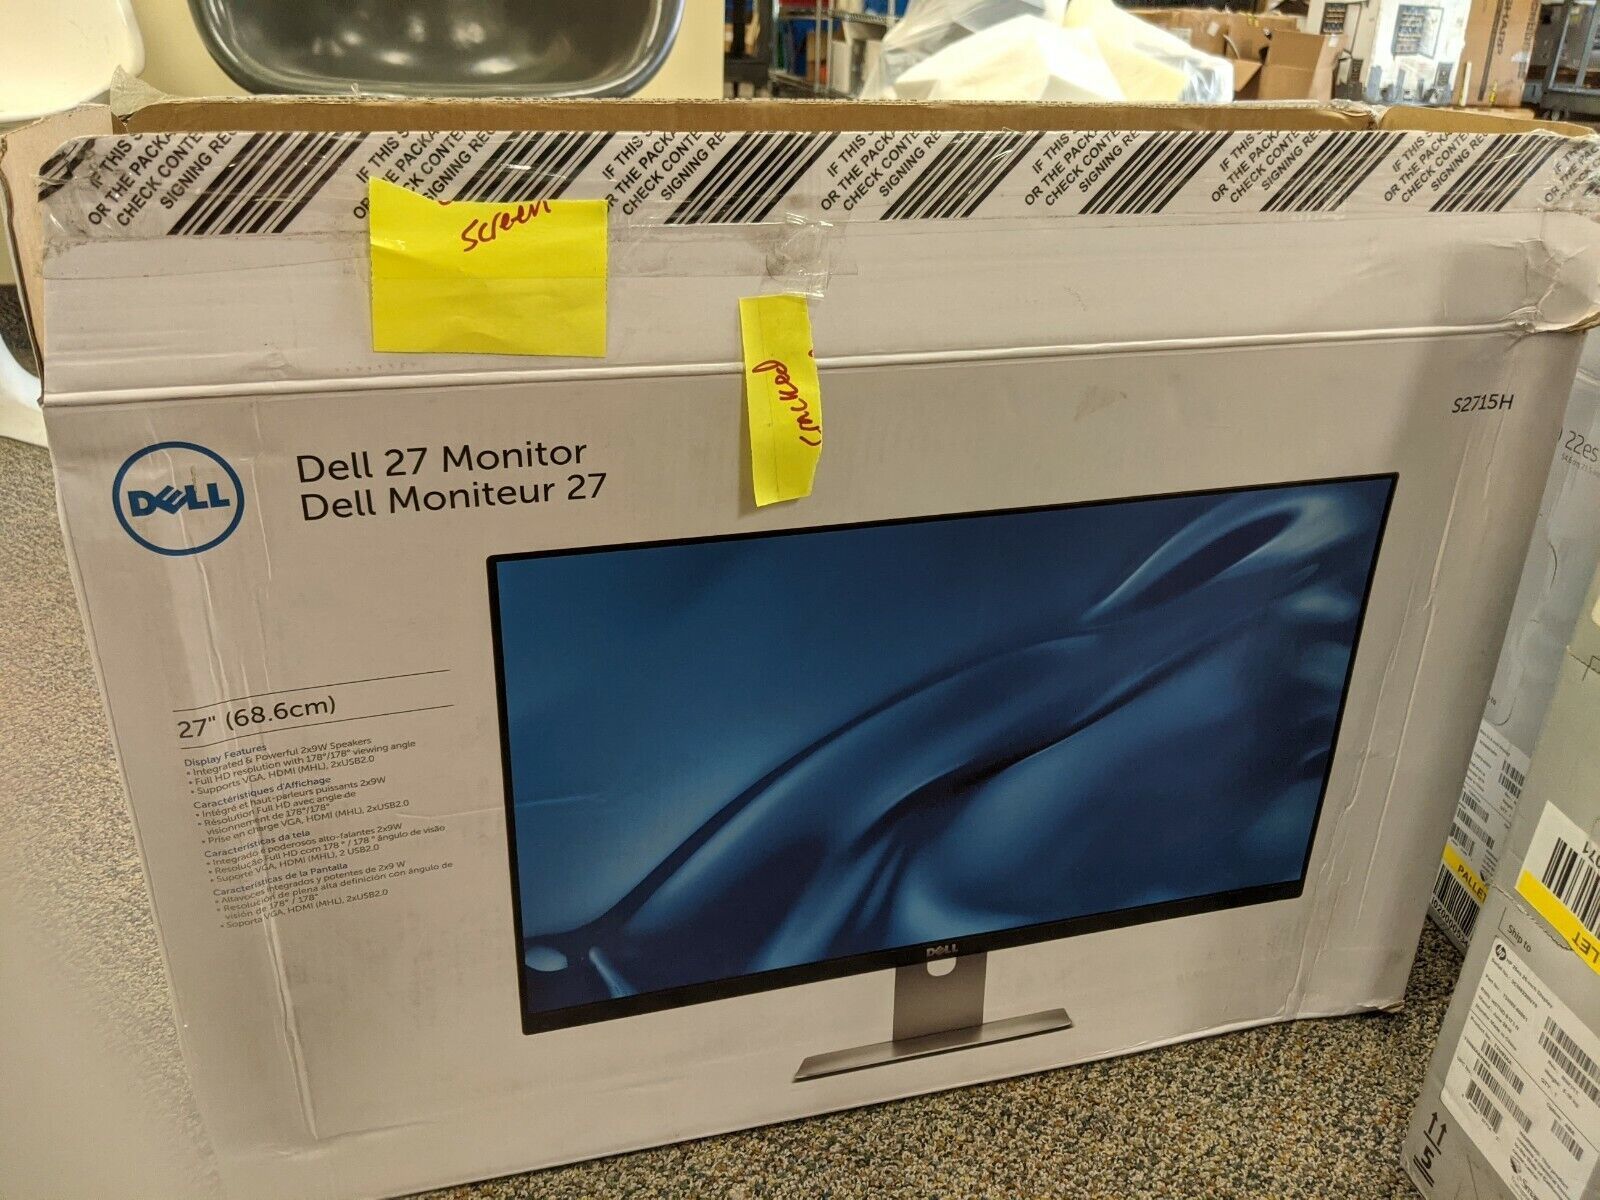 Dell 27" COMPUTER MONITOR S2715H Display for Parts CRACKED BROKEN - $42.27